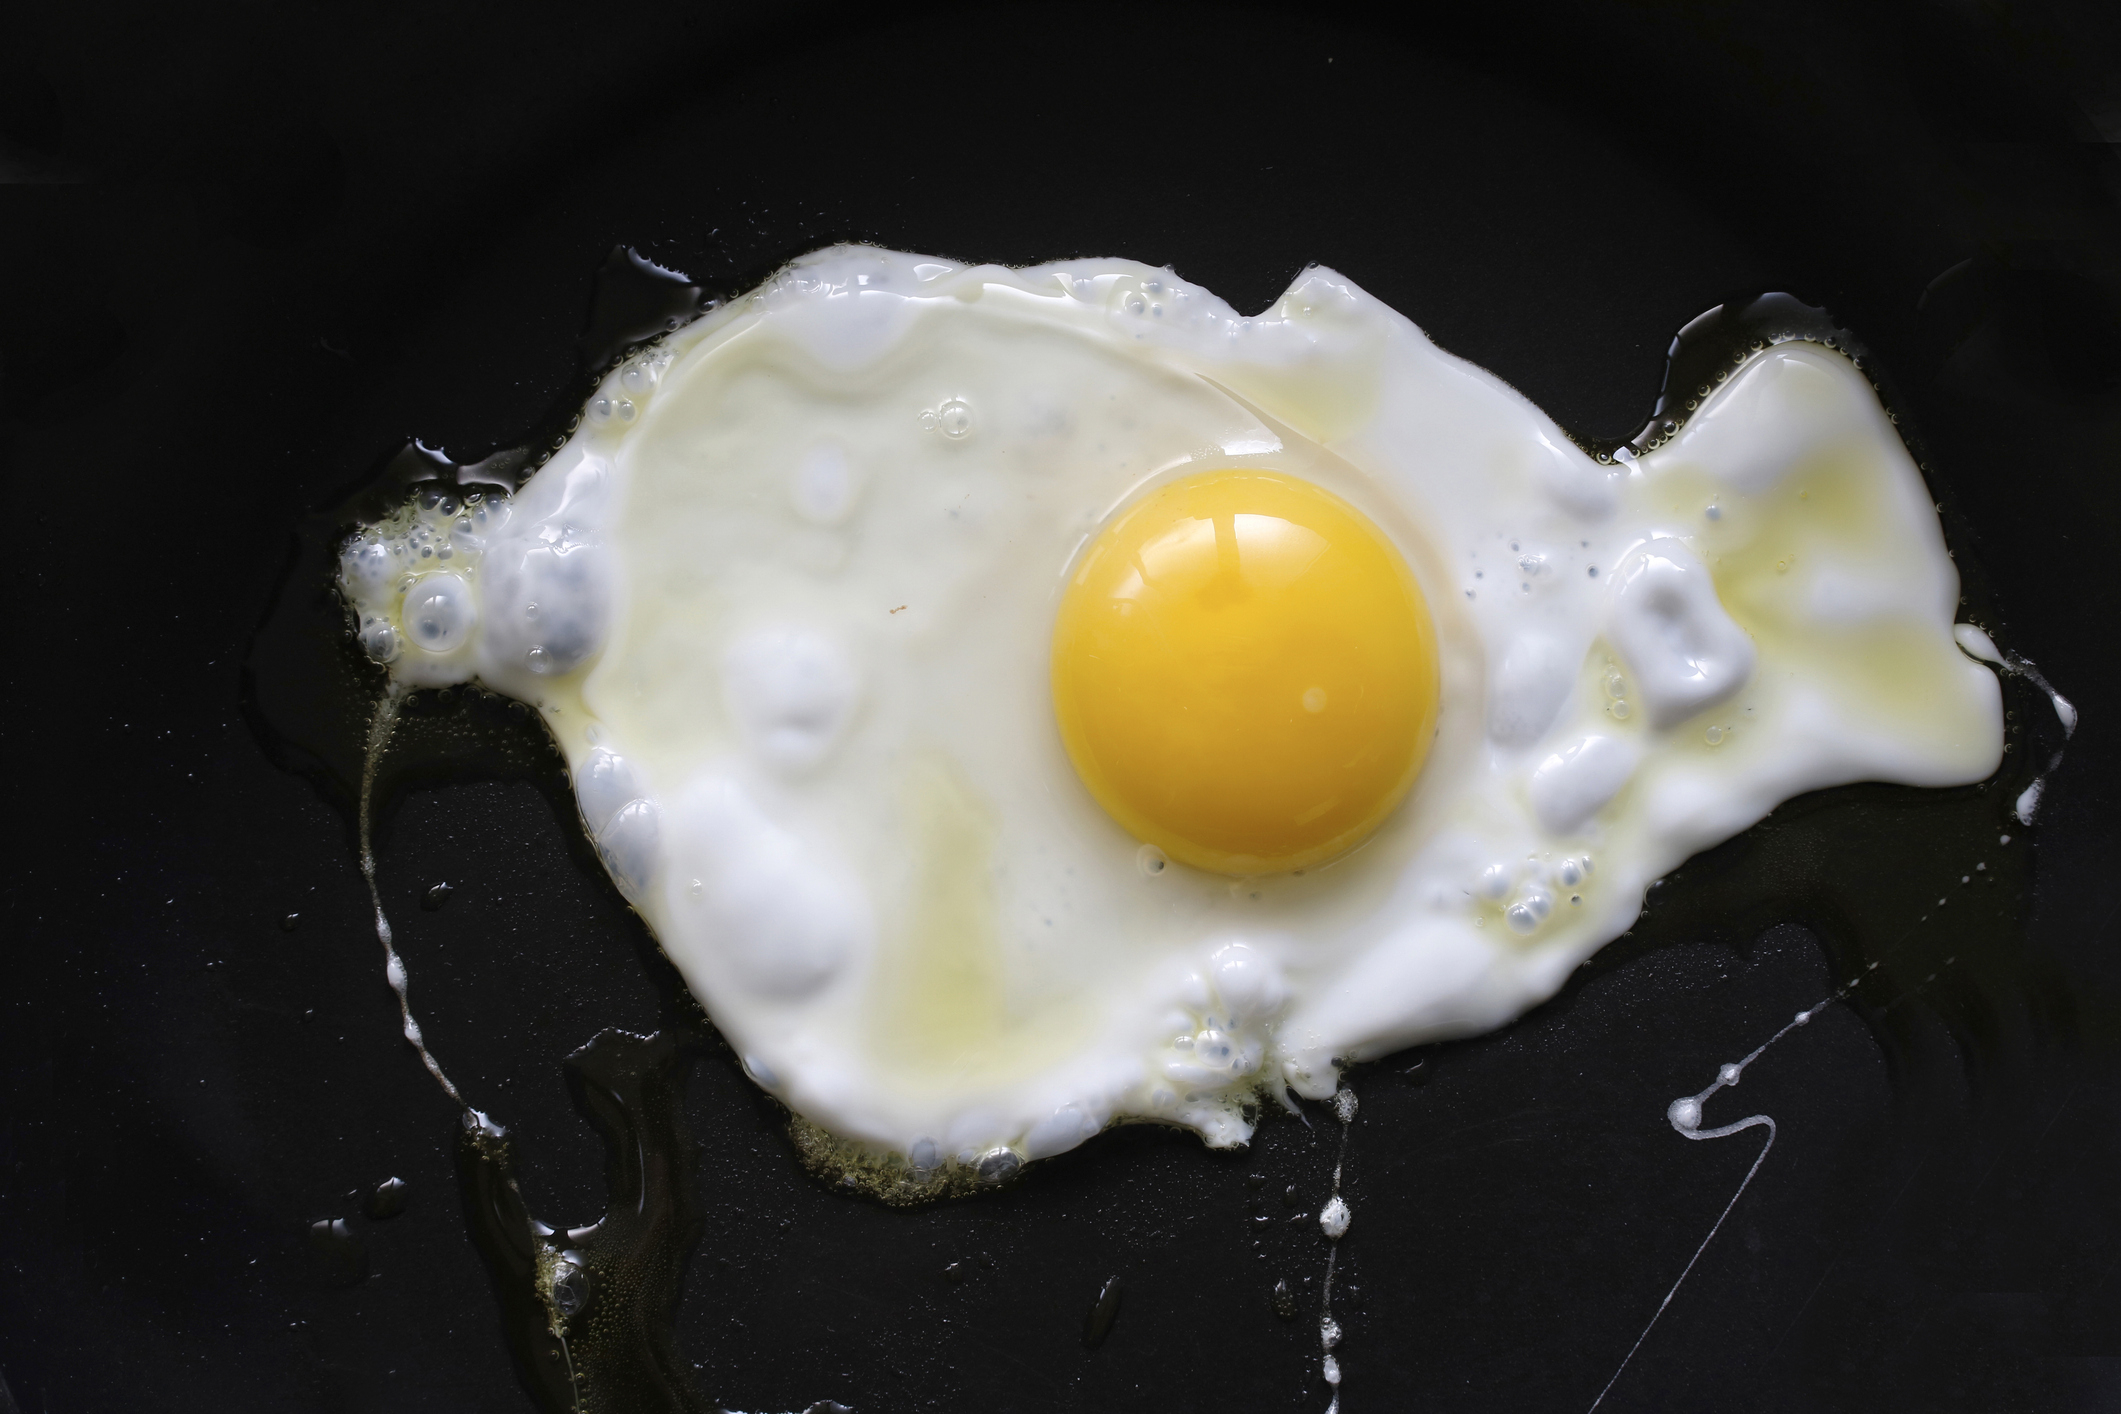 A close-up of a fried egg with a fully cooked white and a slightly runny yolk on a black surface